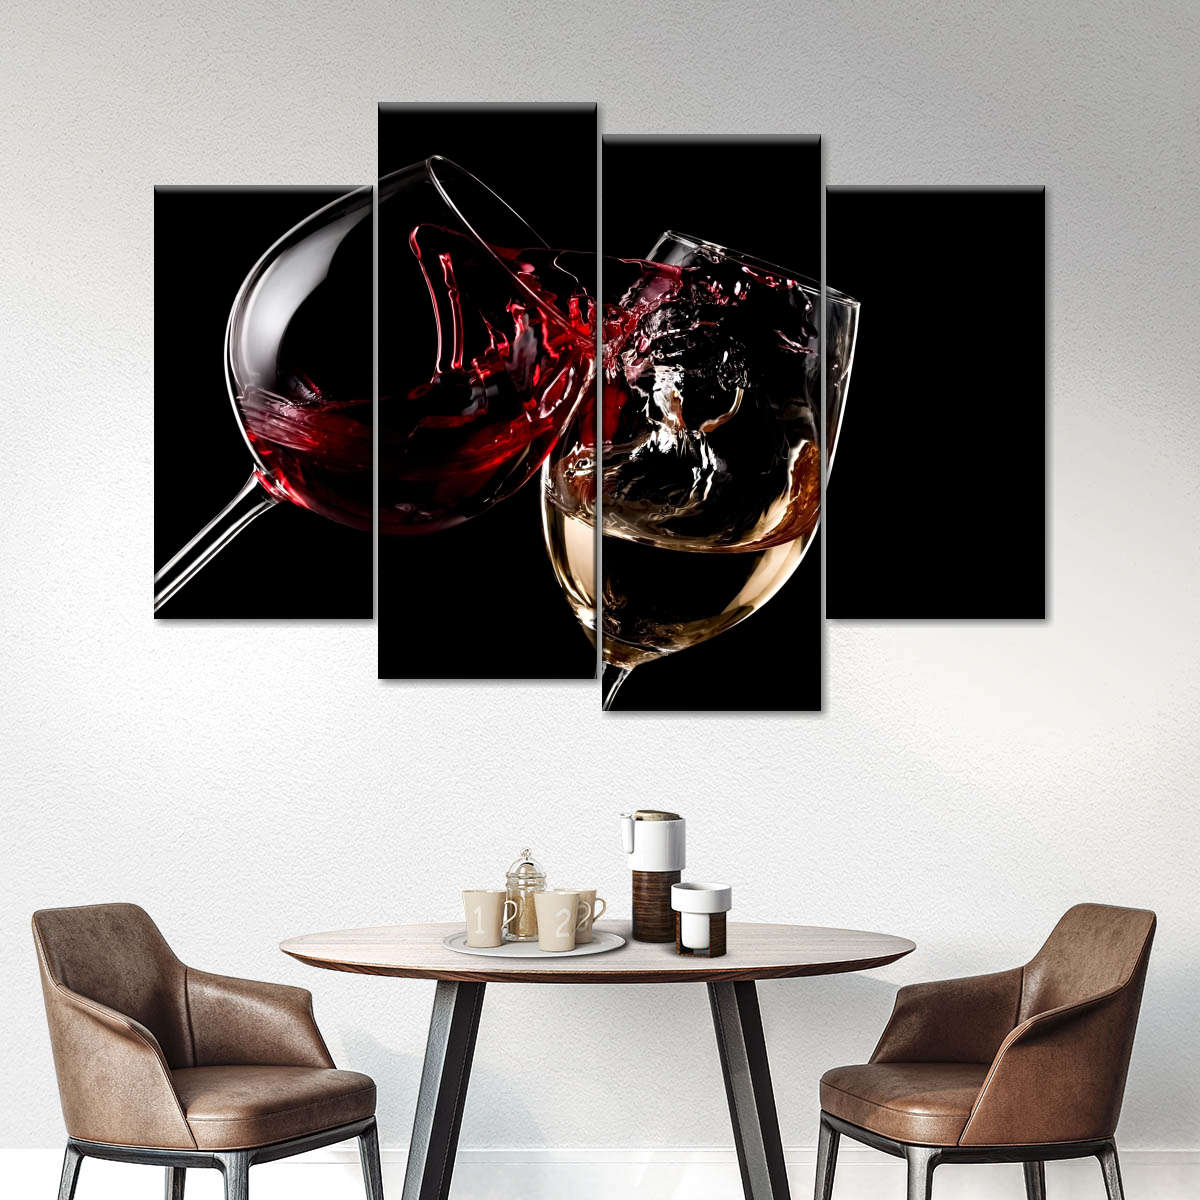 Red And White Wine Glasses Wall Art: Canvas Prints, Art Prints & Framed ...